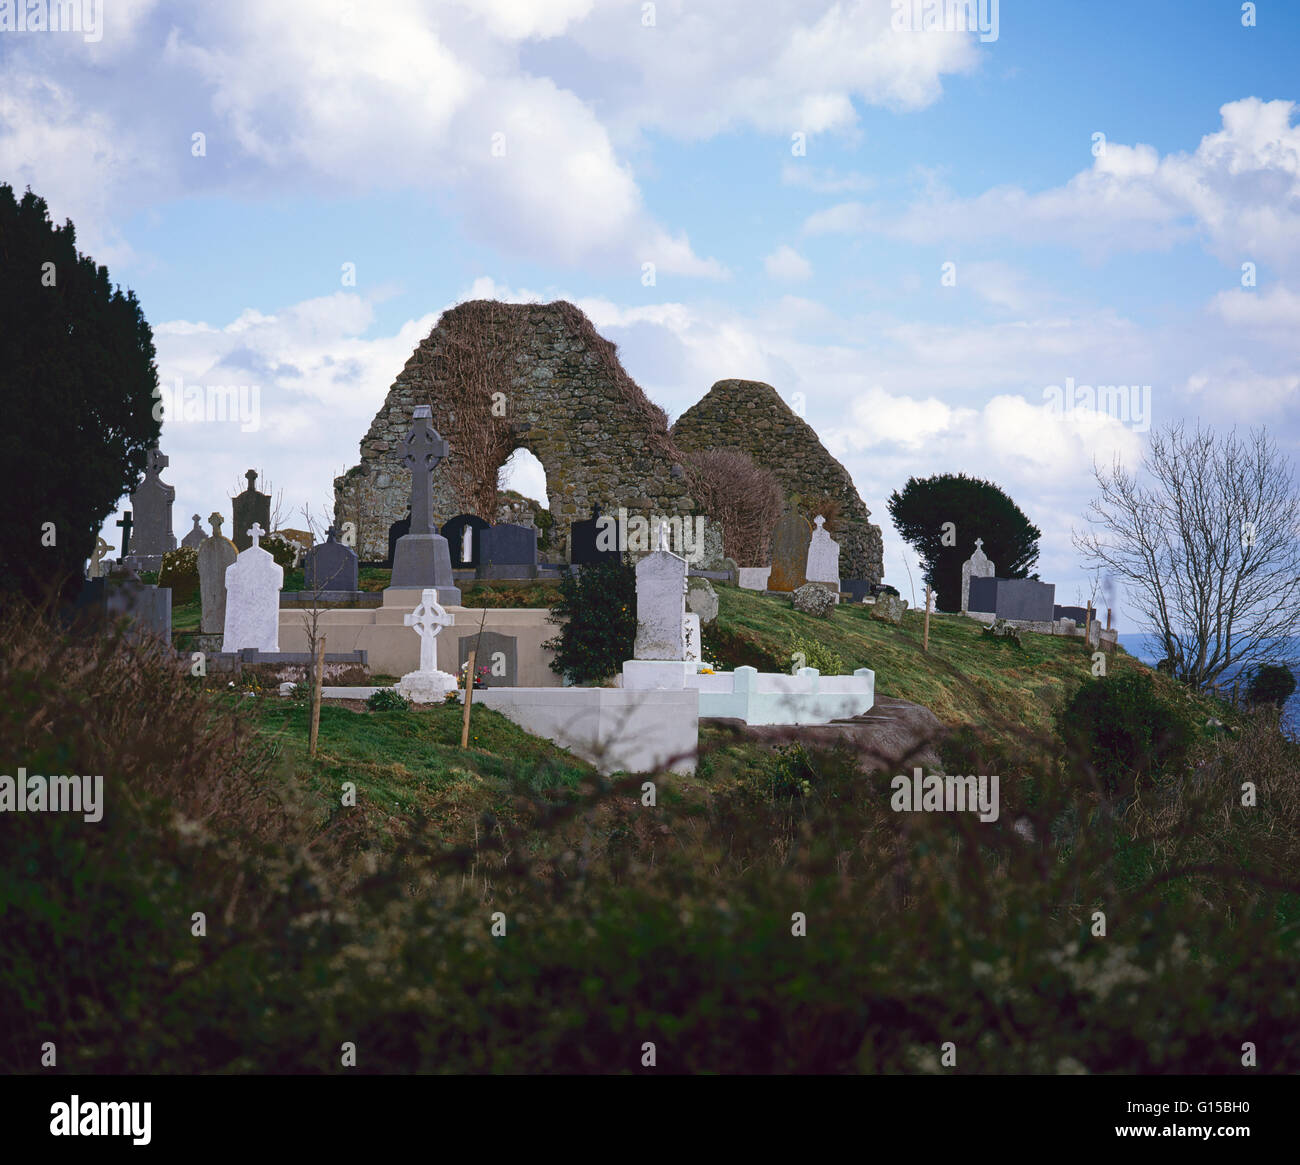 Ruins of Ardboe 10th Century Monastery on the shores of Lough Neagh, County Tyrone, Northern Ireland Stock Photo